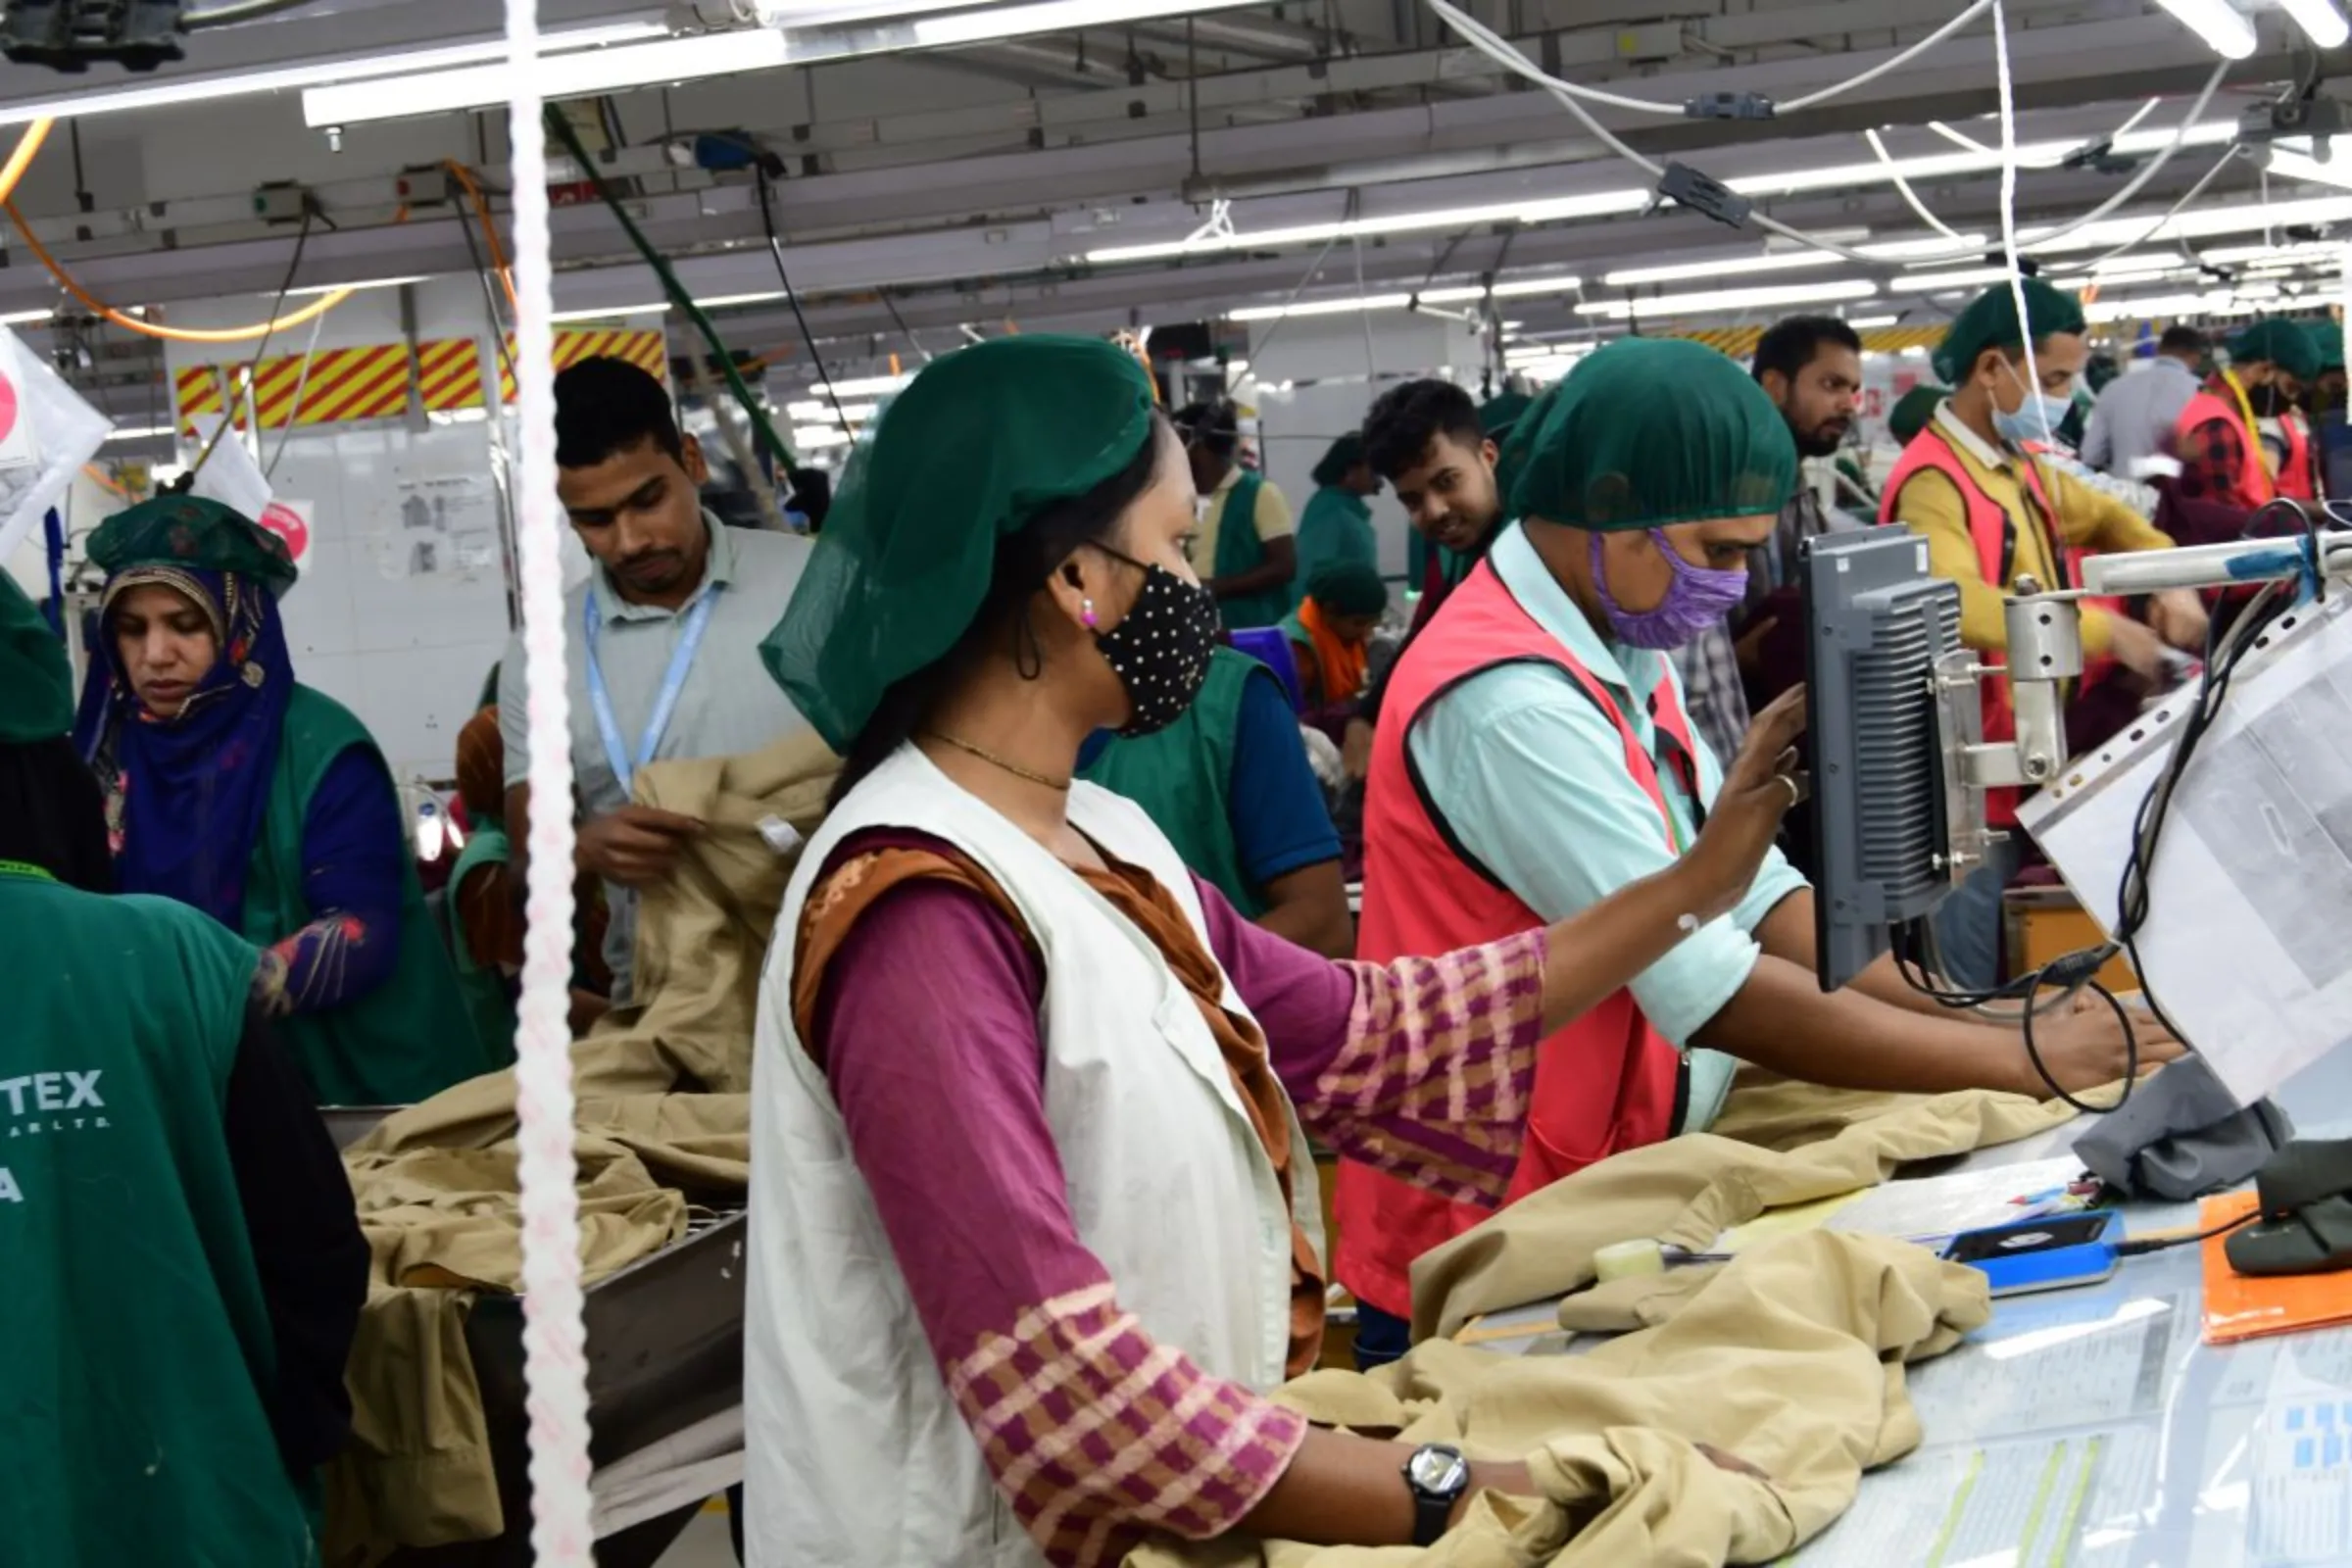 Workers finalise products at the Snowtex Outerware garment factory in Dhamrai, Bangladesh, January 30, 2023. Thomson Reuters Foundation/Mosabber Hossain